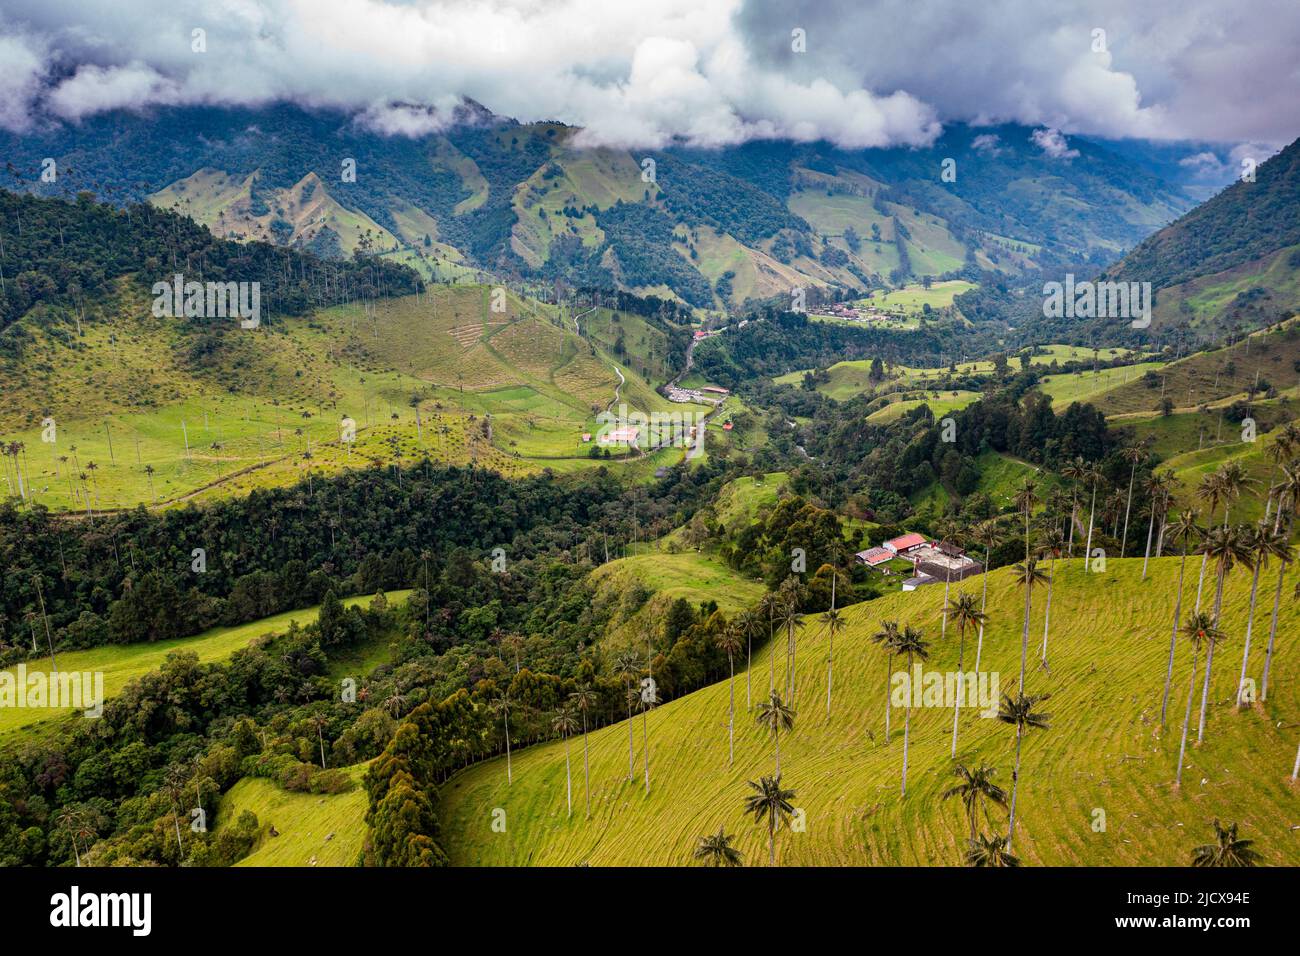 Aerial of the Cocora Valley, UNESCO World Heritage Site, Coffee Cultural Landscape, Salento, Colombia, South America Stock Photo